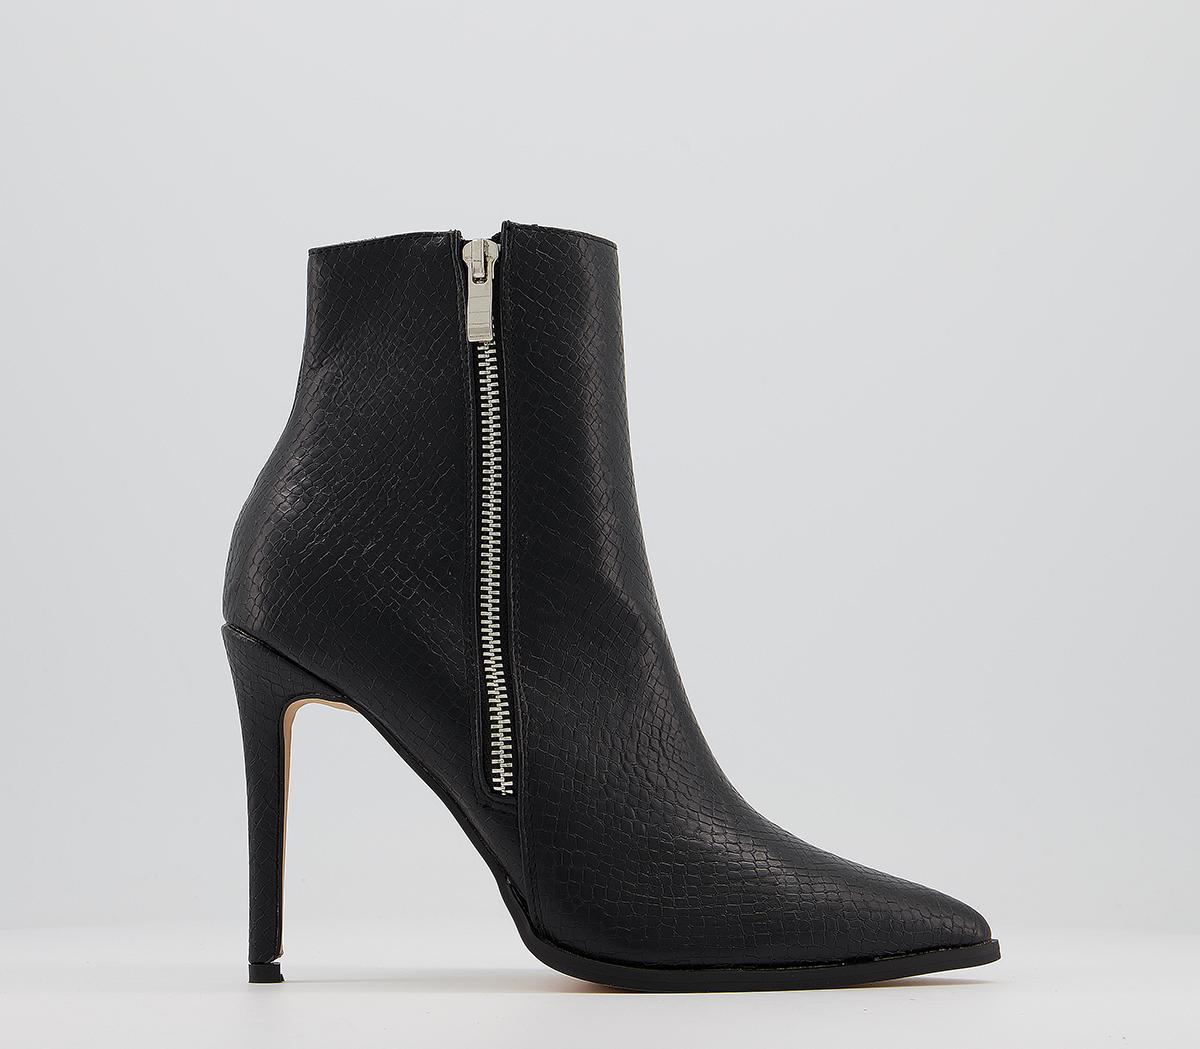 OFFICEAccompany Dressy Pointed BootsBlack Snake